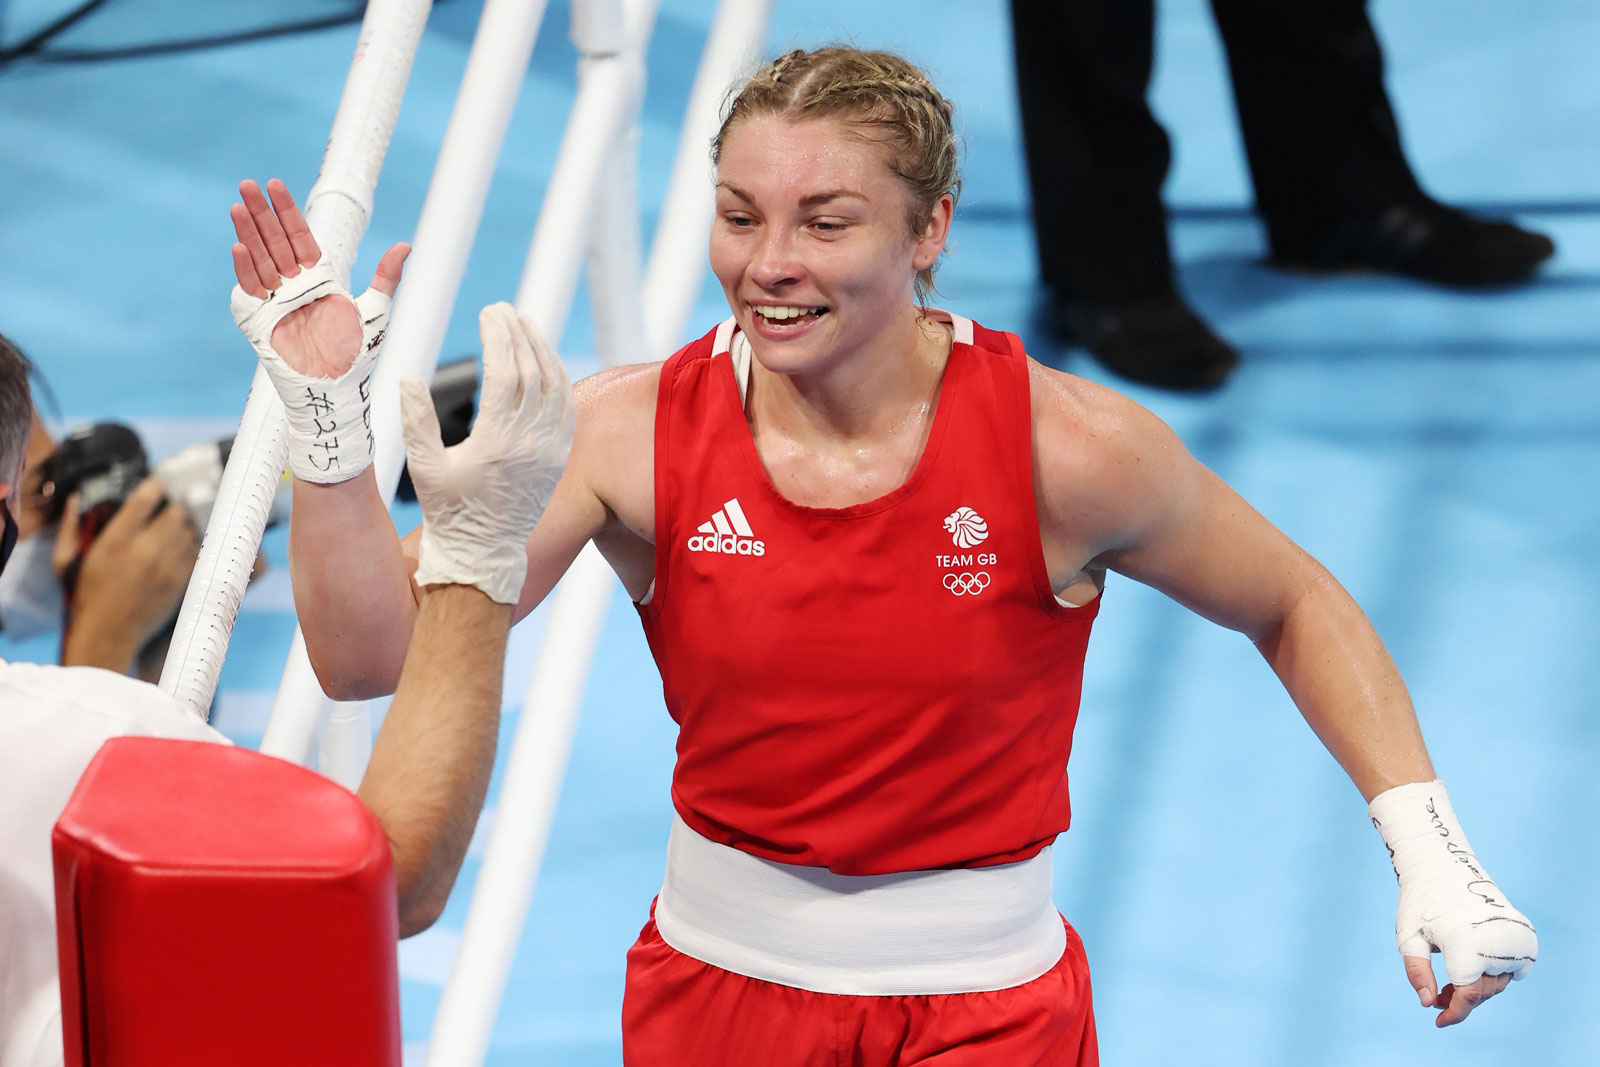 Lauren Price celebrates after defeating China's Qian Li during the middleweight boxing final.